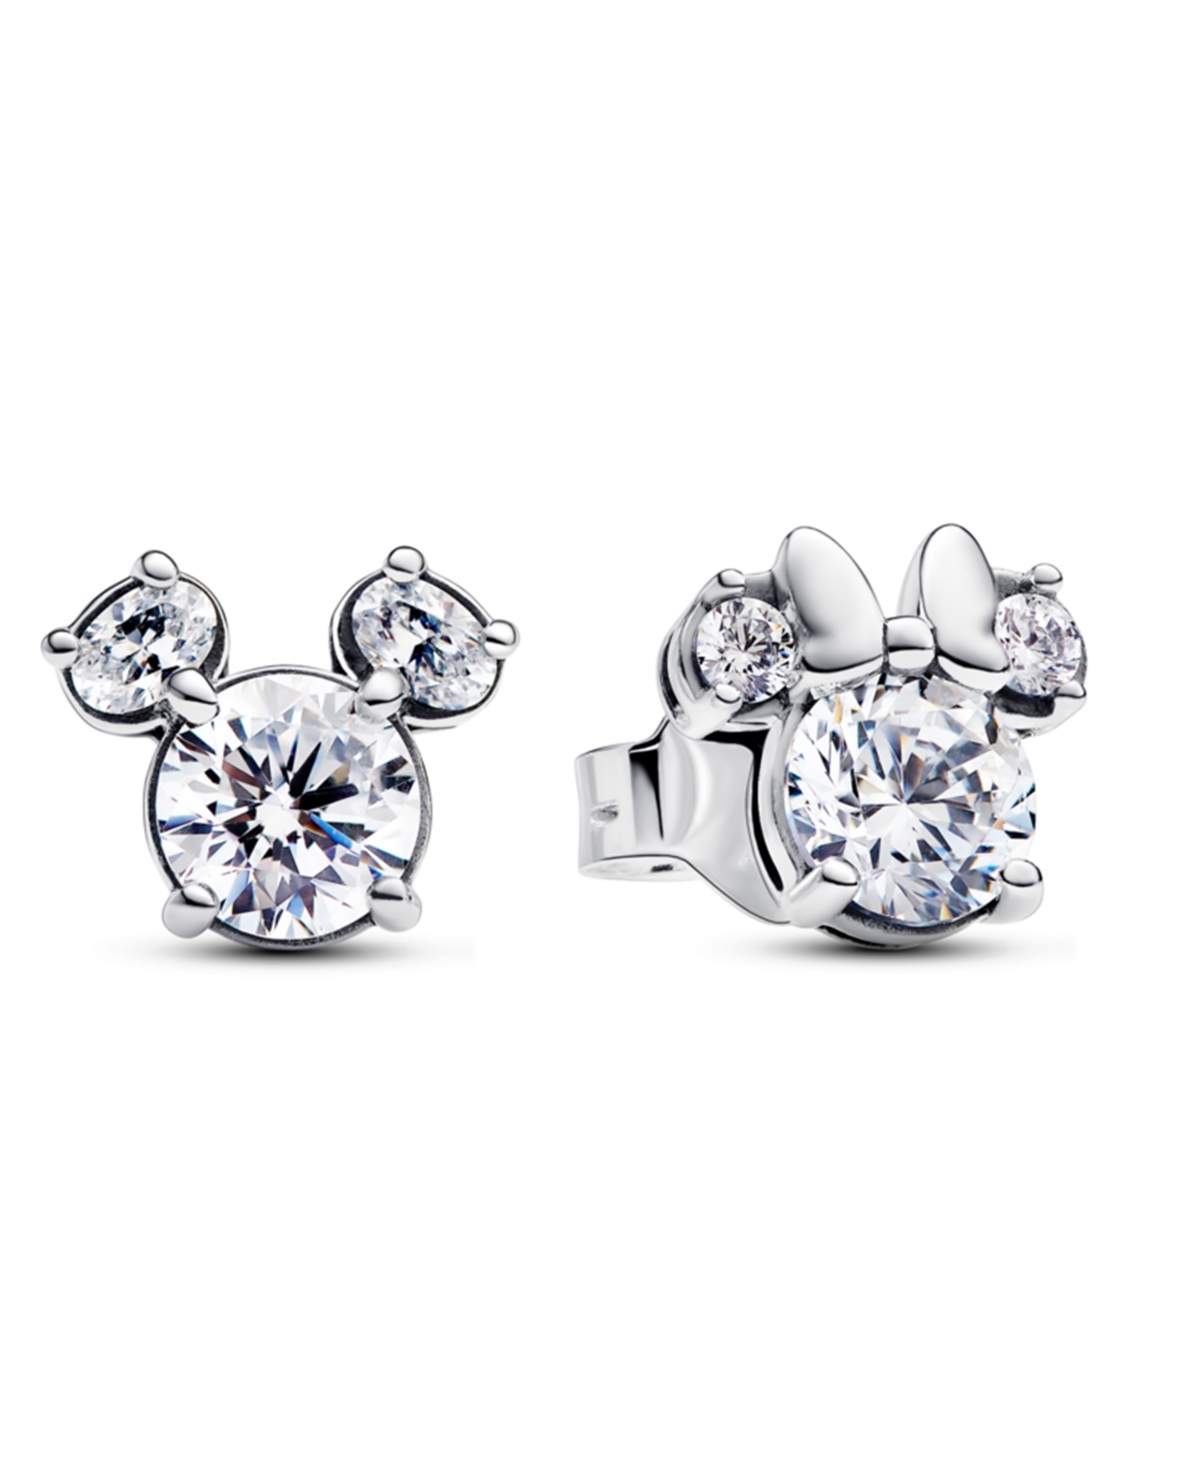 Mickey Mouse Minnie Mouse Sparkling Stud Earrings - Silver